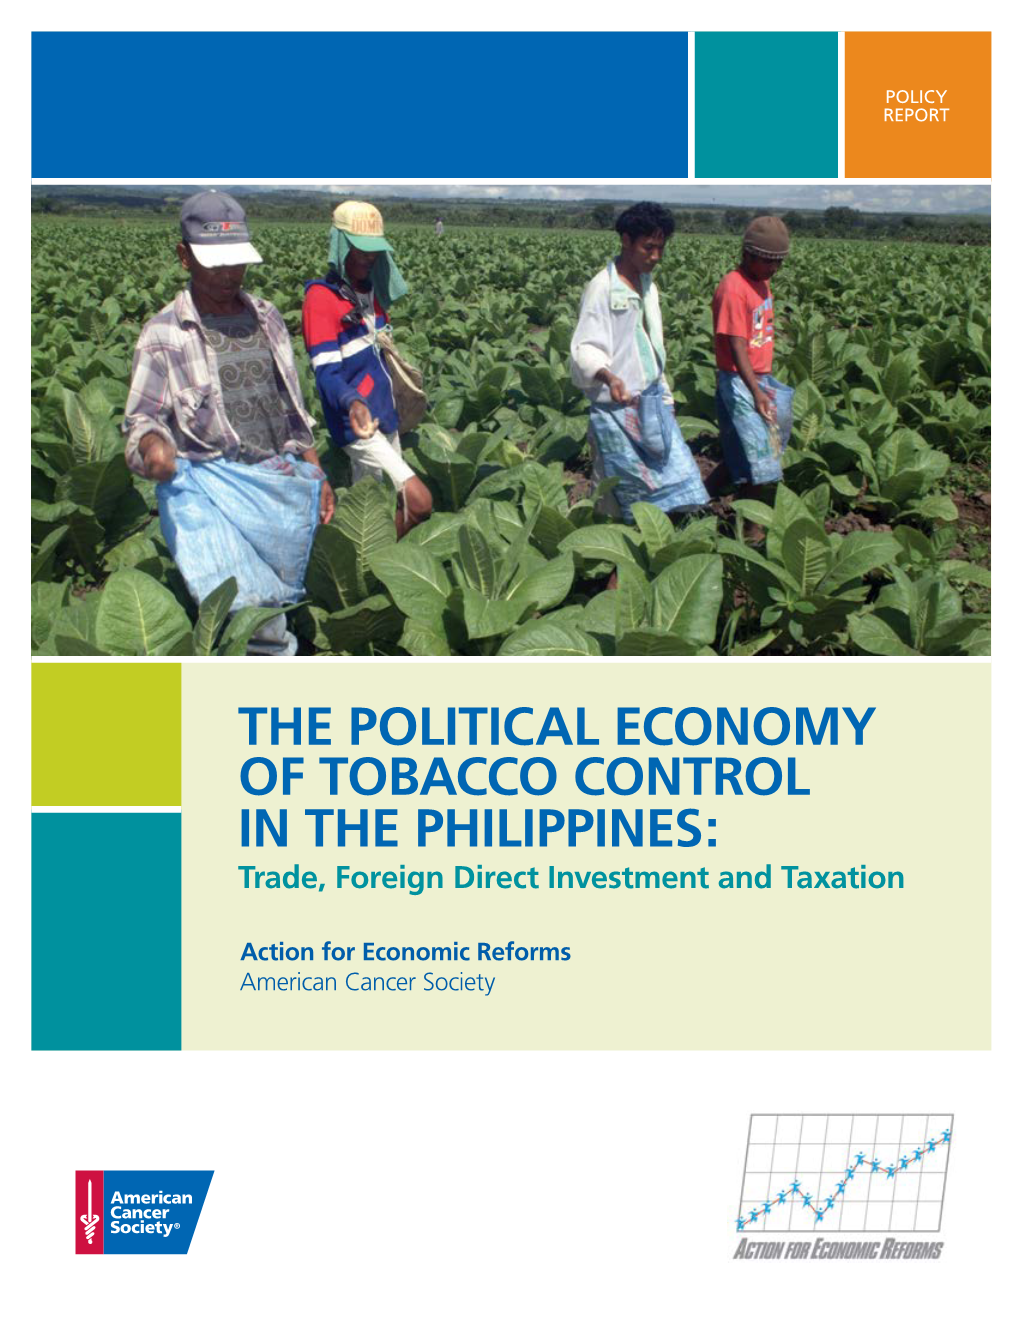 THE POLITICAL ECONOMY of TOBACCO CONTROL in the PHILIPPINES: Trade, Foreign Direct Investment and Taxation